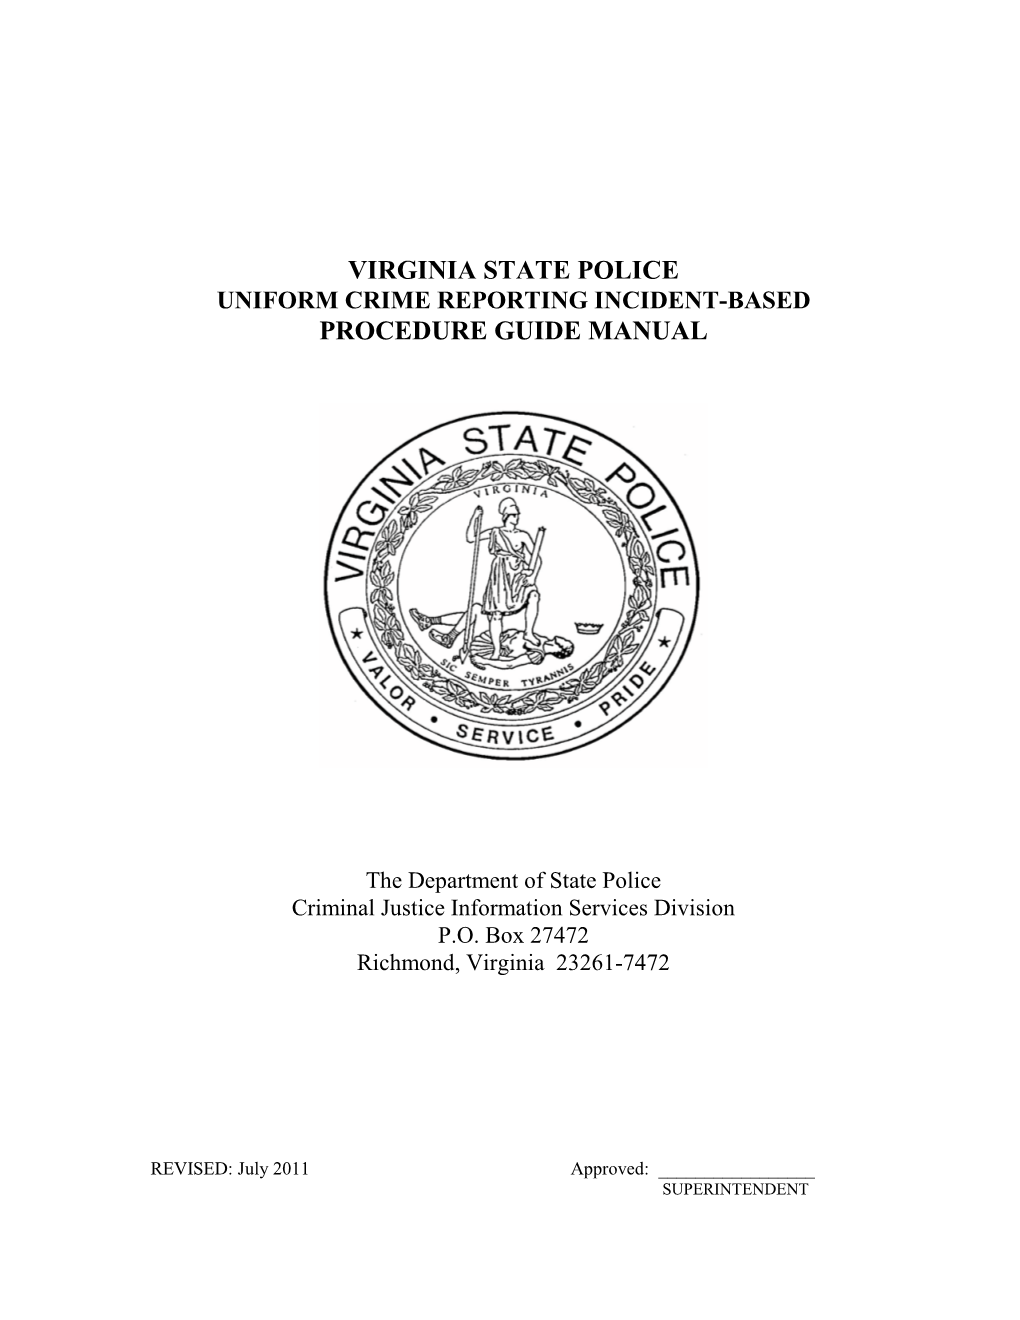 Virginia State Police Uniform Crime Reporting Incident-Based Procedure Guide Manual